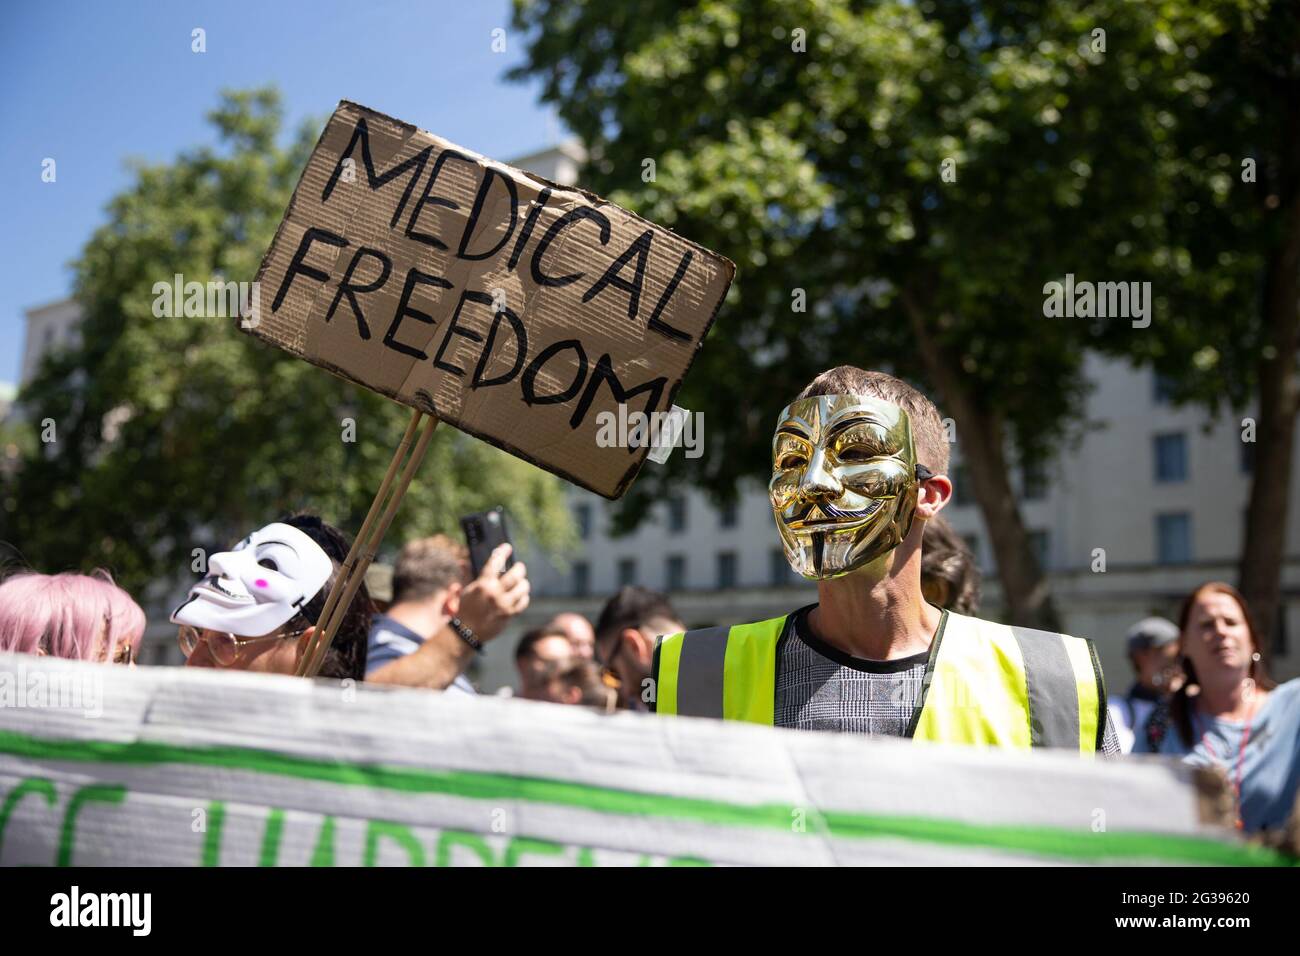 London, UK. 14th June 2021. Anti-vaxx protesters with their slogans. Yuen Ching Ng/Alamy Live News Stock Photo